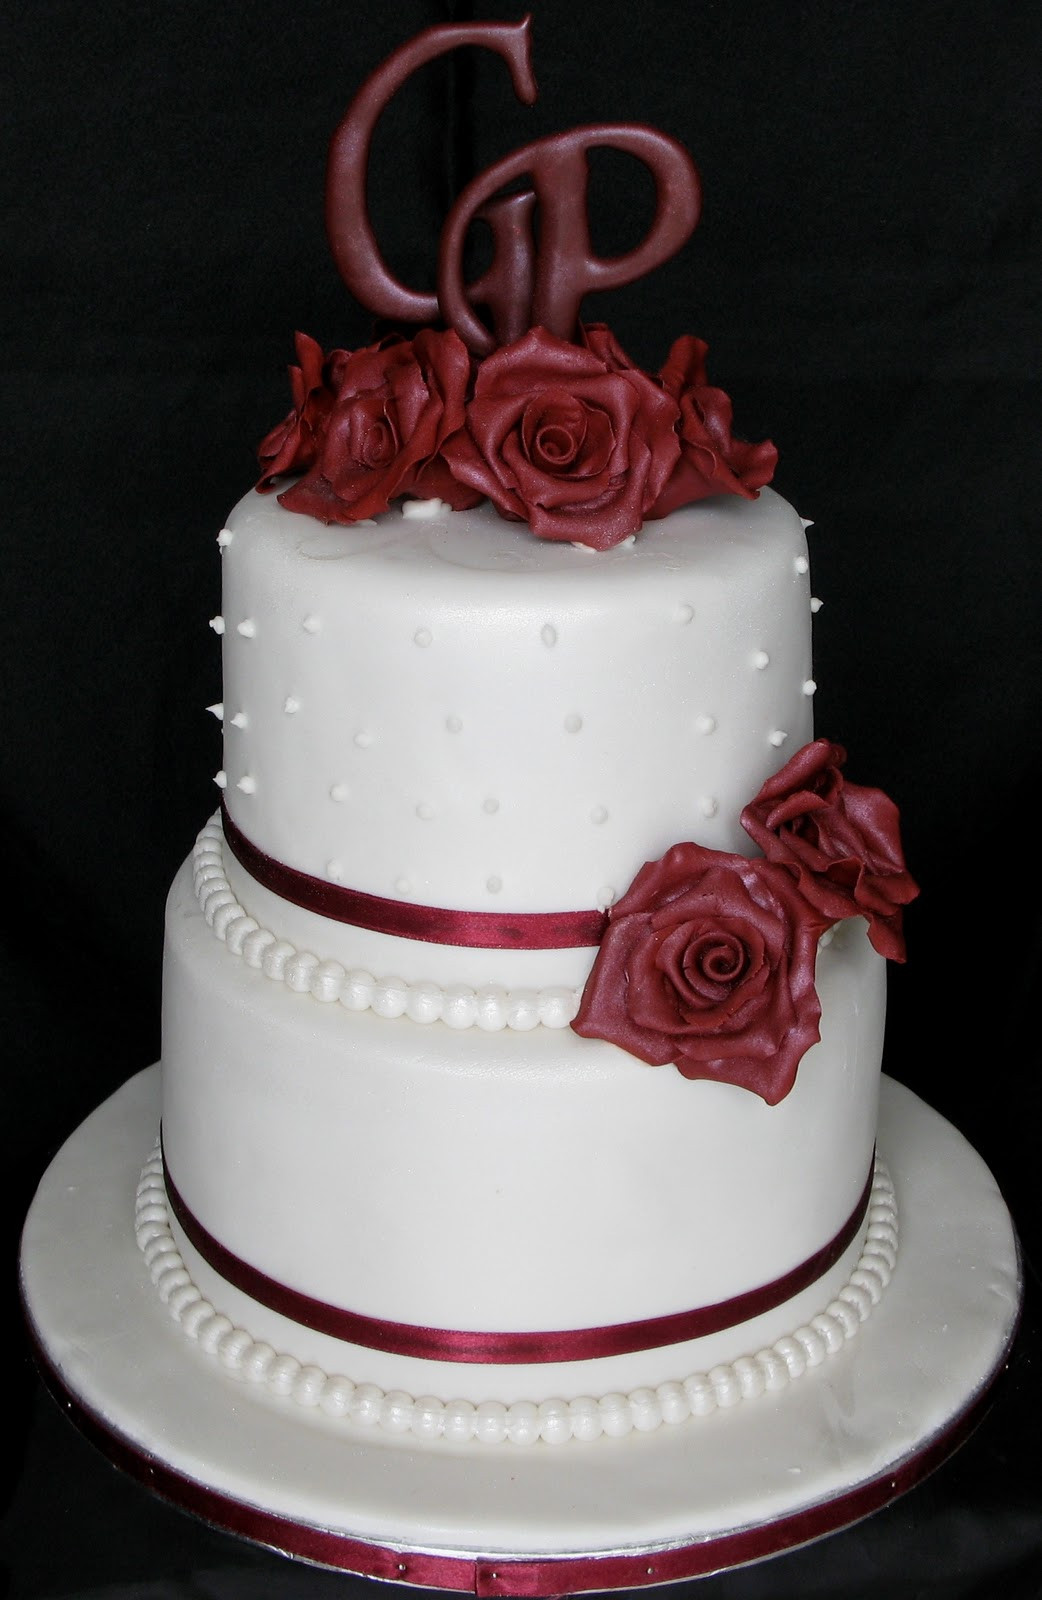 2 Layer Wedding Cakes
 Sugarcraft by Soni Two Layer Wedding Cake with Roses